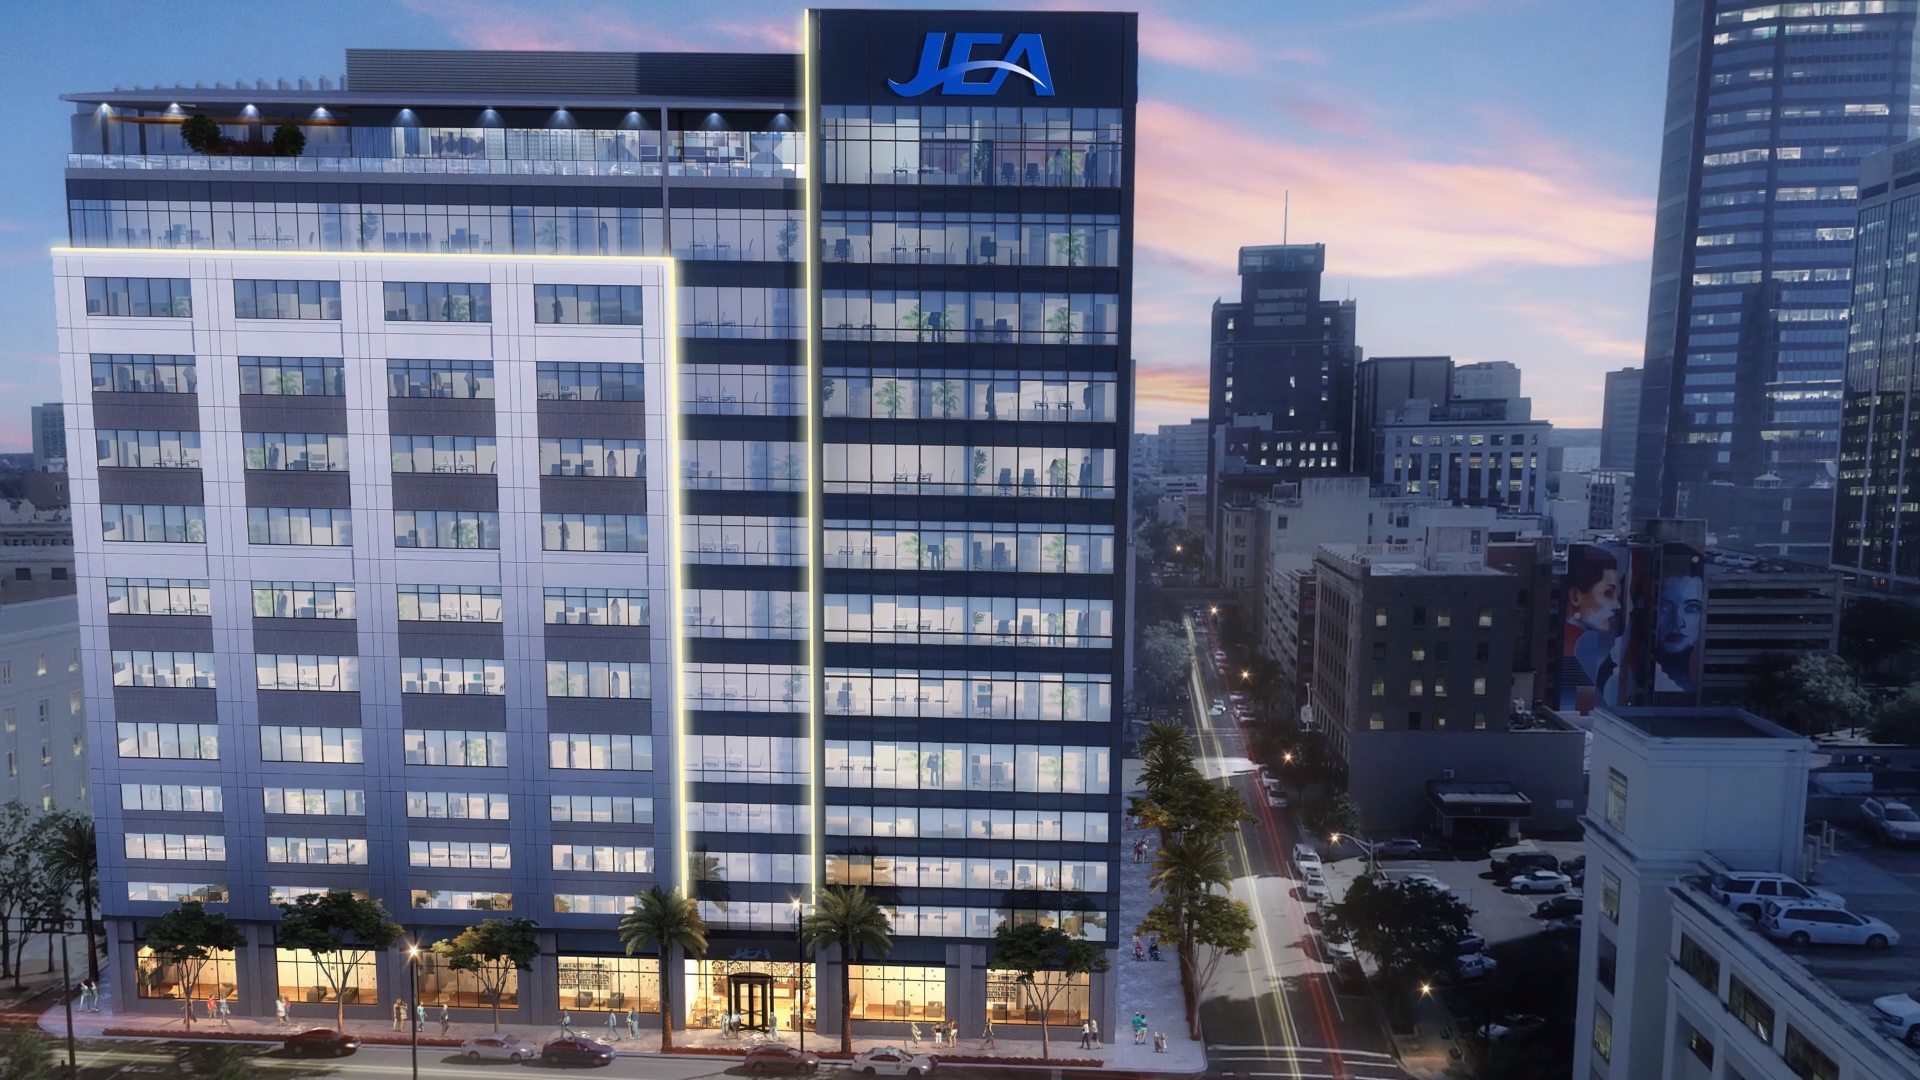 JEA will remain Downtown after selecting a site near the Duval County Courthouse.